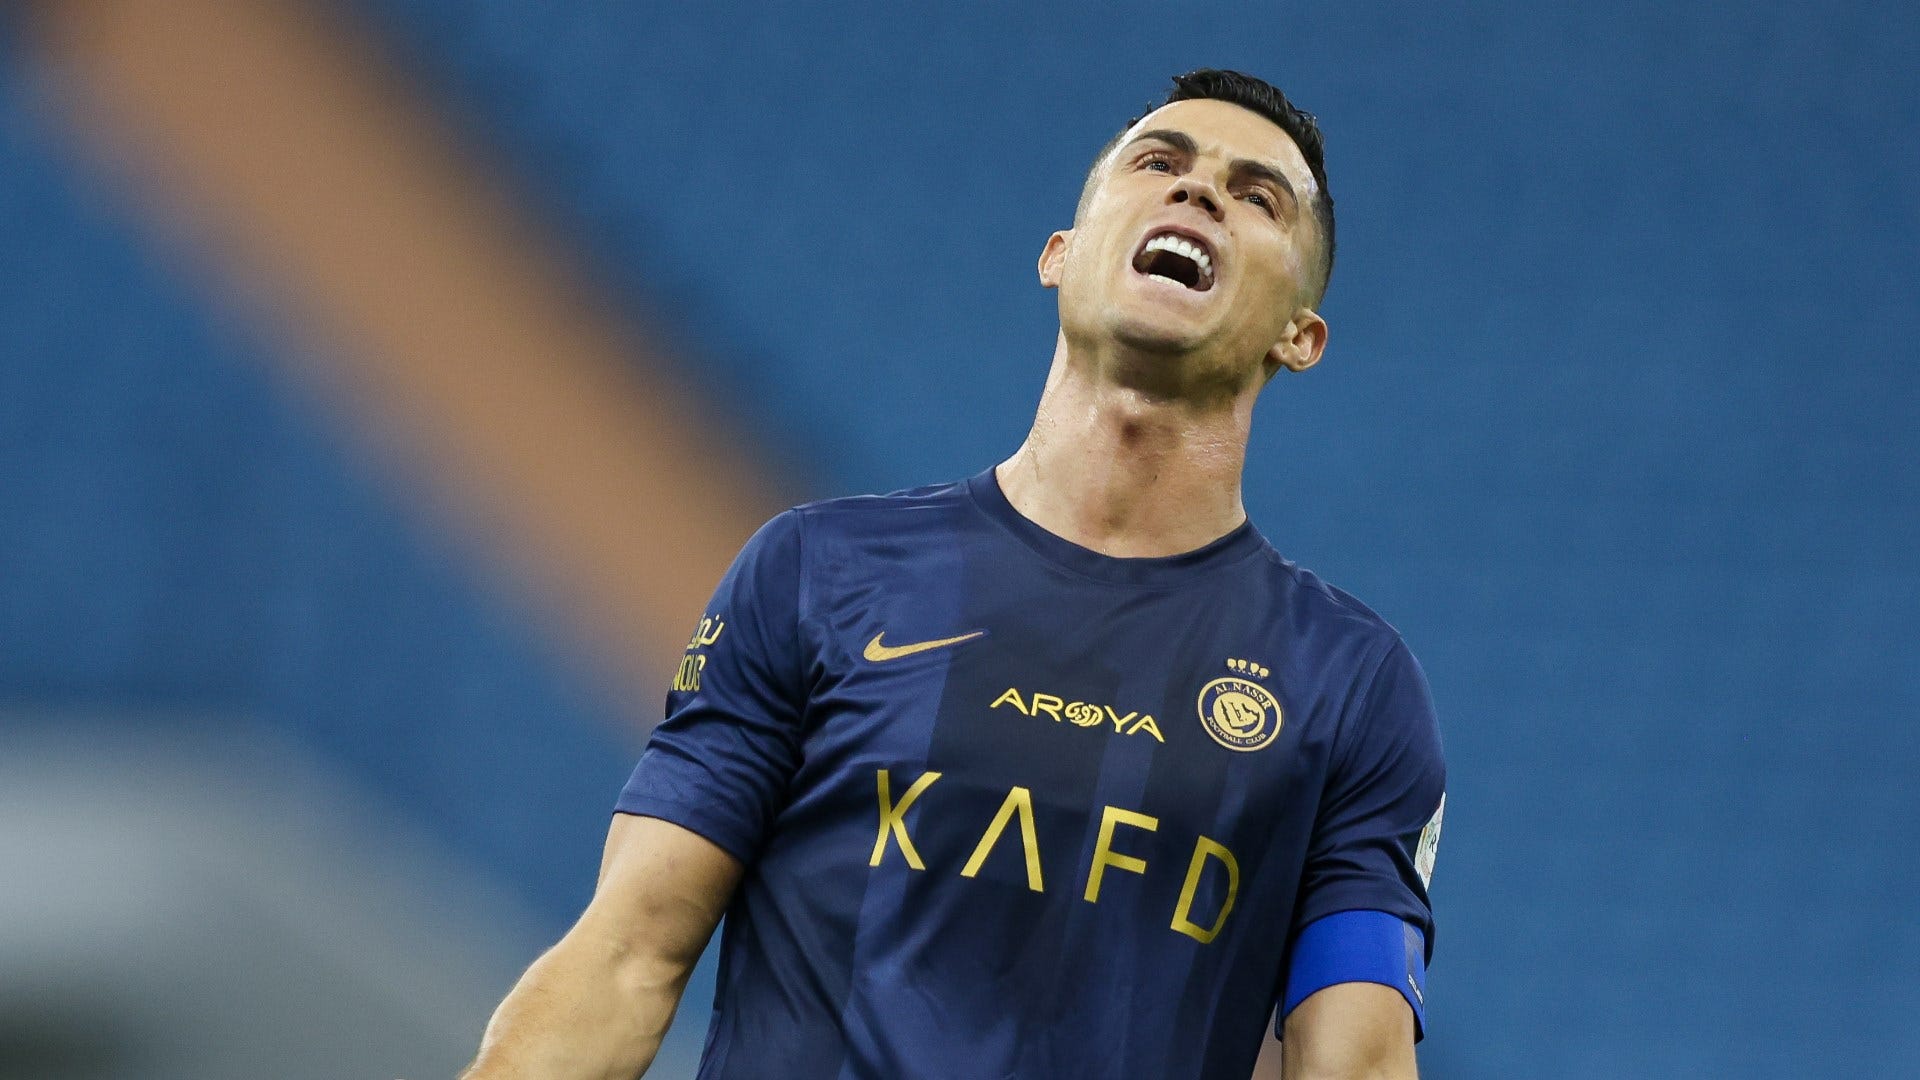 PHOTO GALLERY: Ronaldo awarded after becoming Real Madrid's all-time top  scorer - Multimedia - Ahram Online